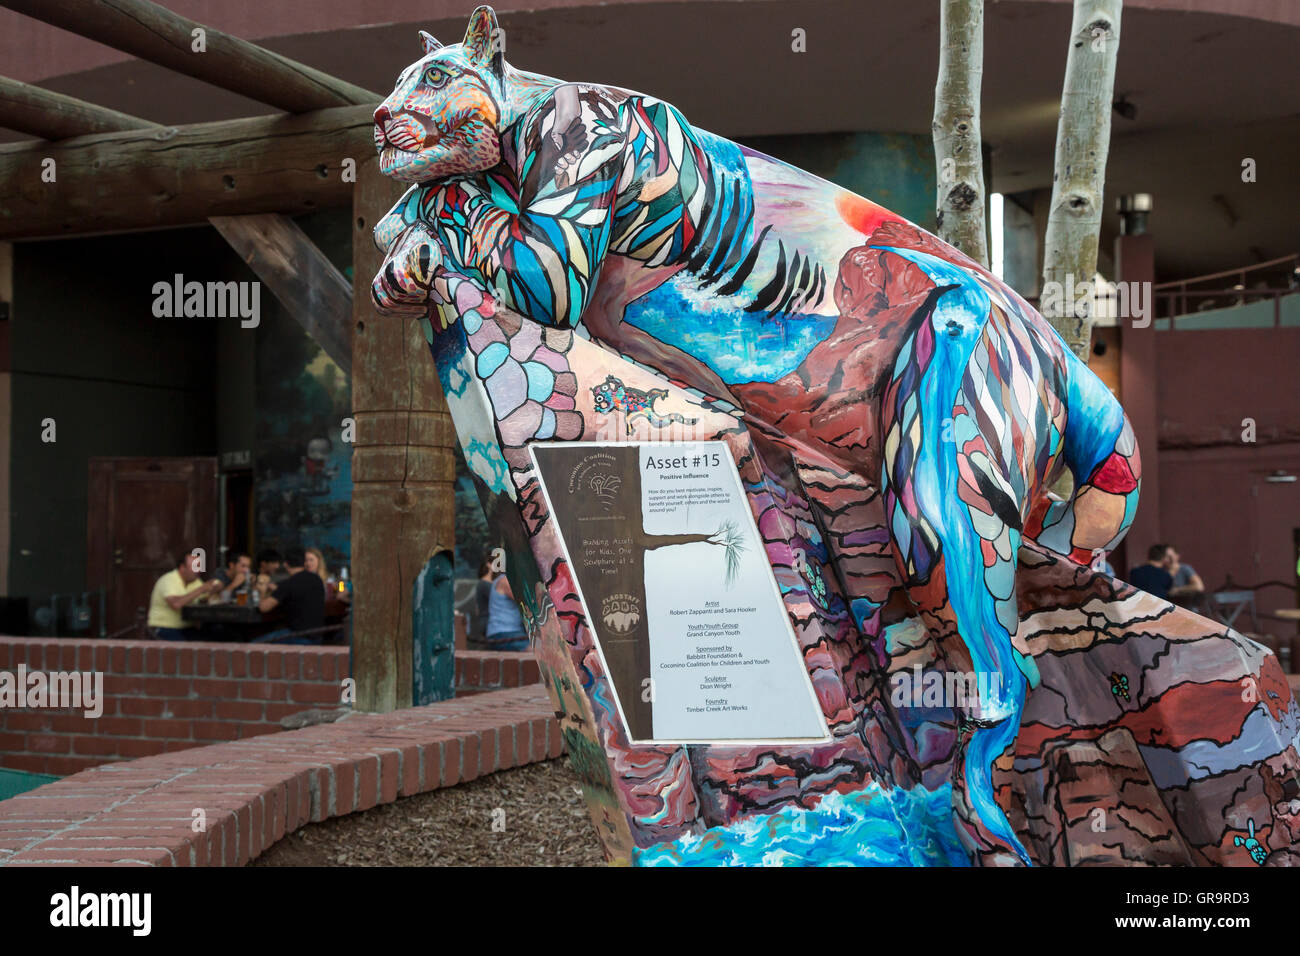 Flagstaff, Arizona - A painted sculpture of a mountain lion on display in Heritage Square. Stock Photo